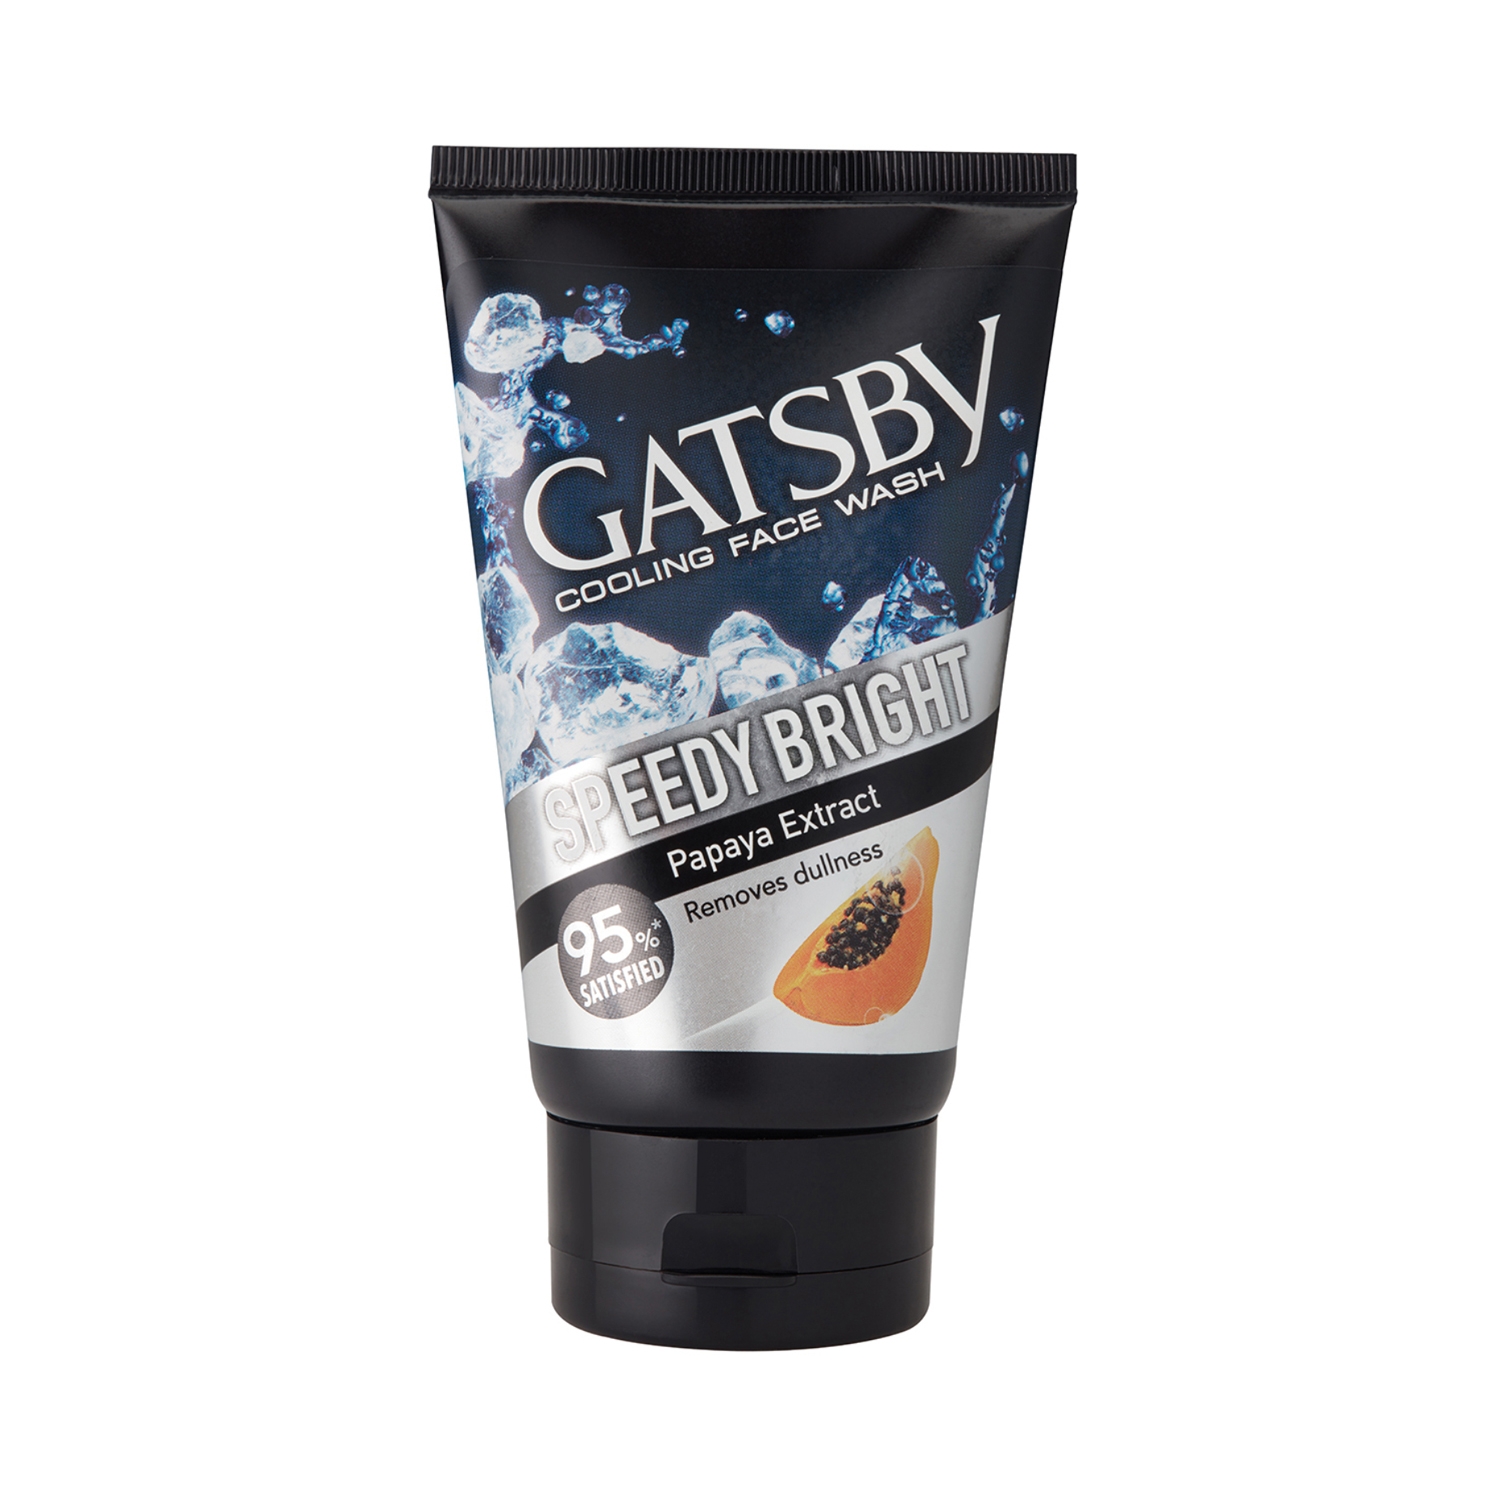 Gatsby Cooling Clear Whitening Face Wash (100g)